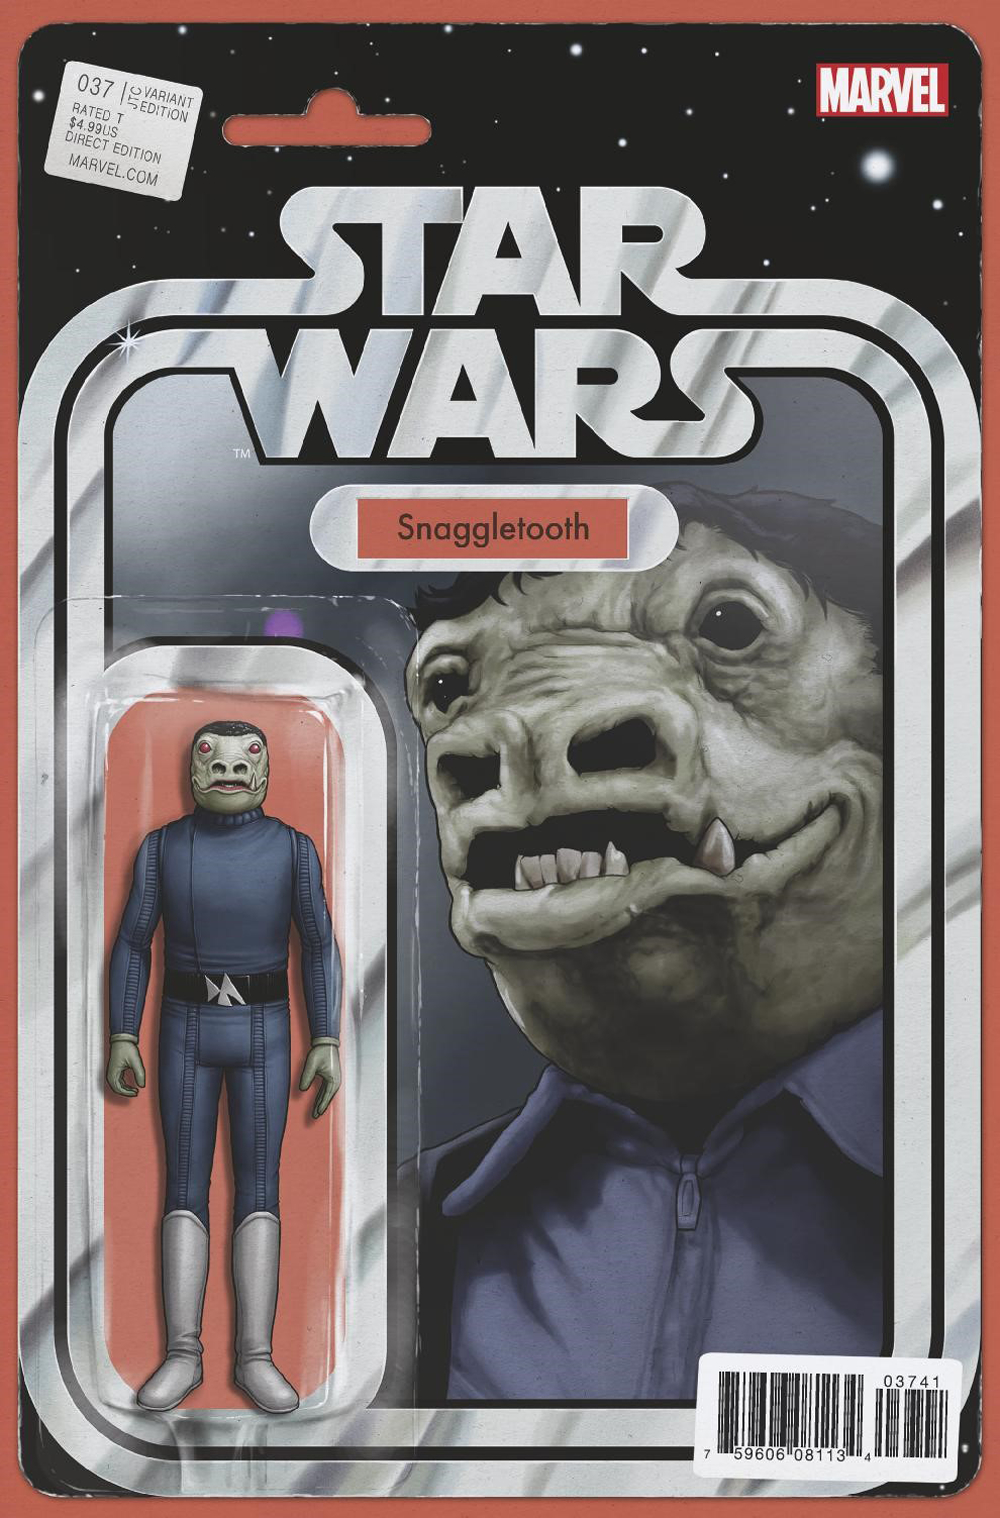 Star Wars #37 ("Snaggletooth" JTC Action Figure Variant Cover) (13.11.2017)